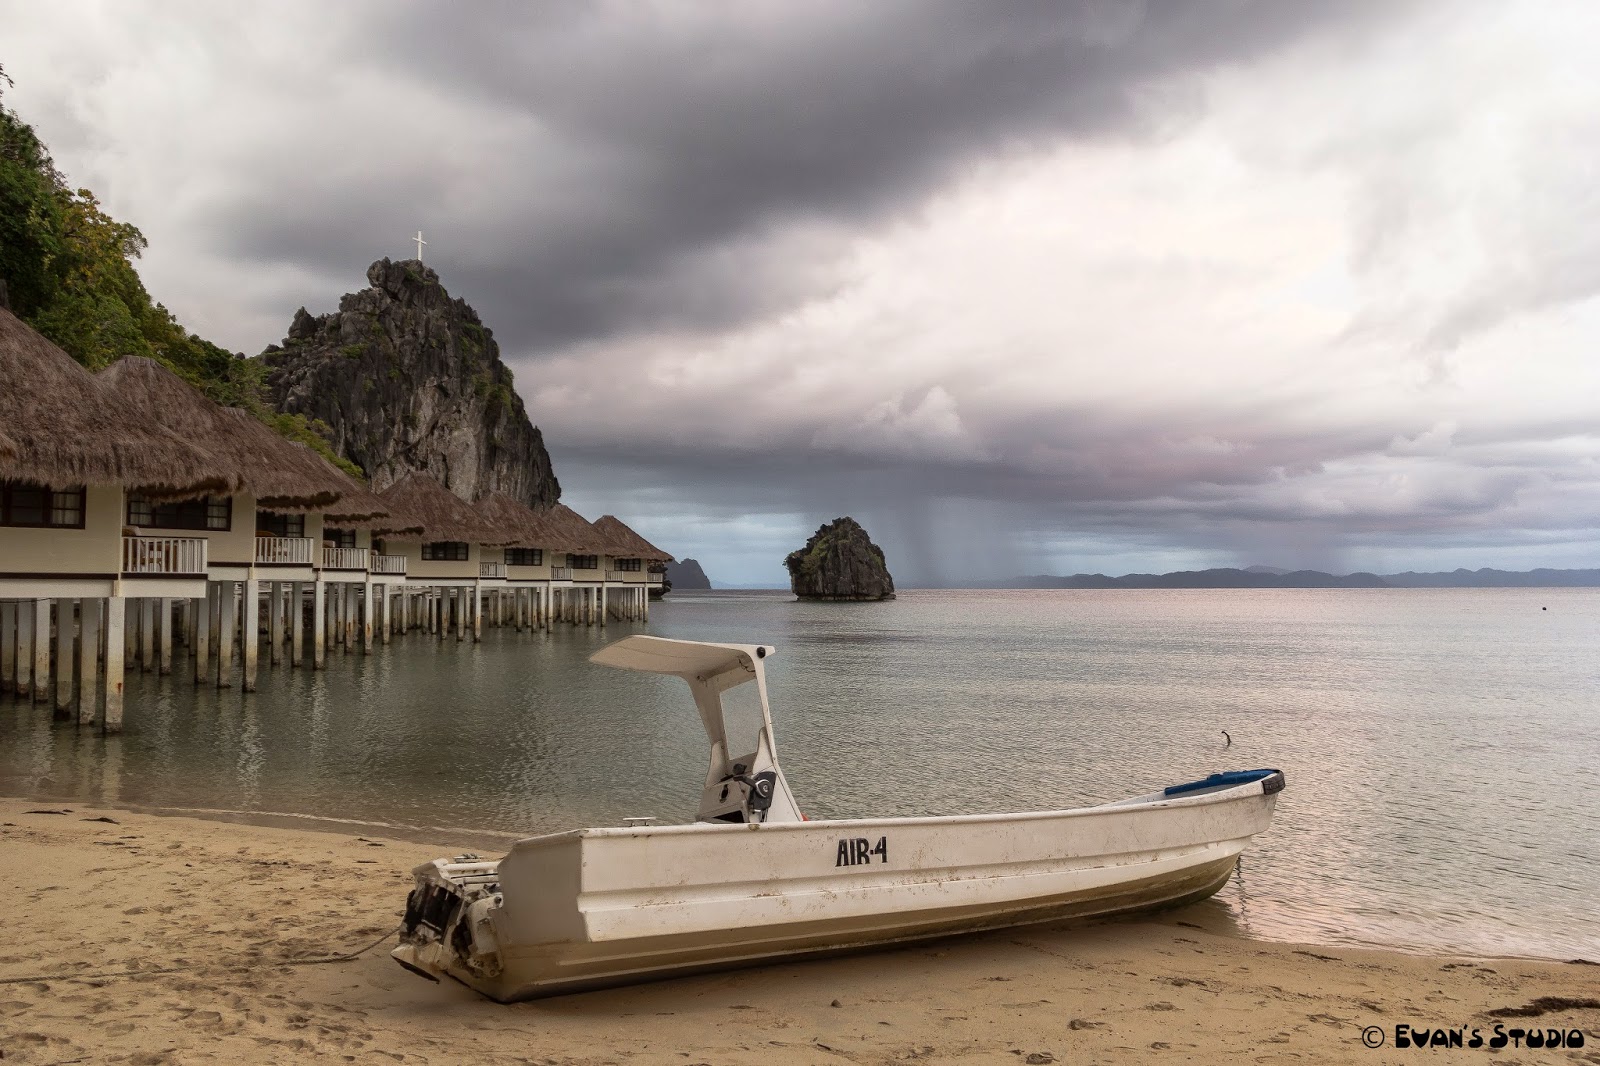   A storm is brewing beyond the Air4 boat at Apulit Island Resort, in the Philippines.